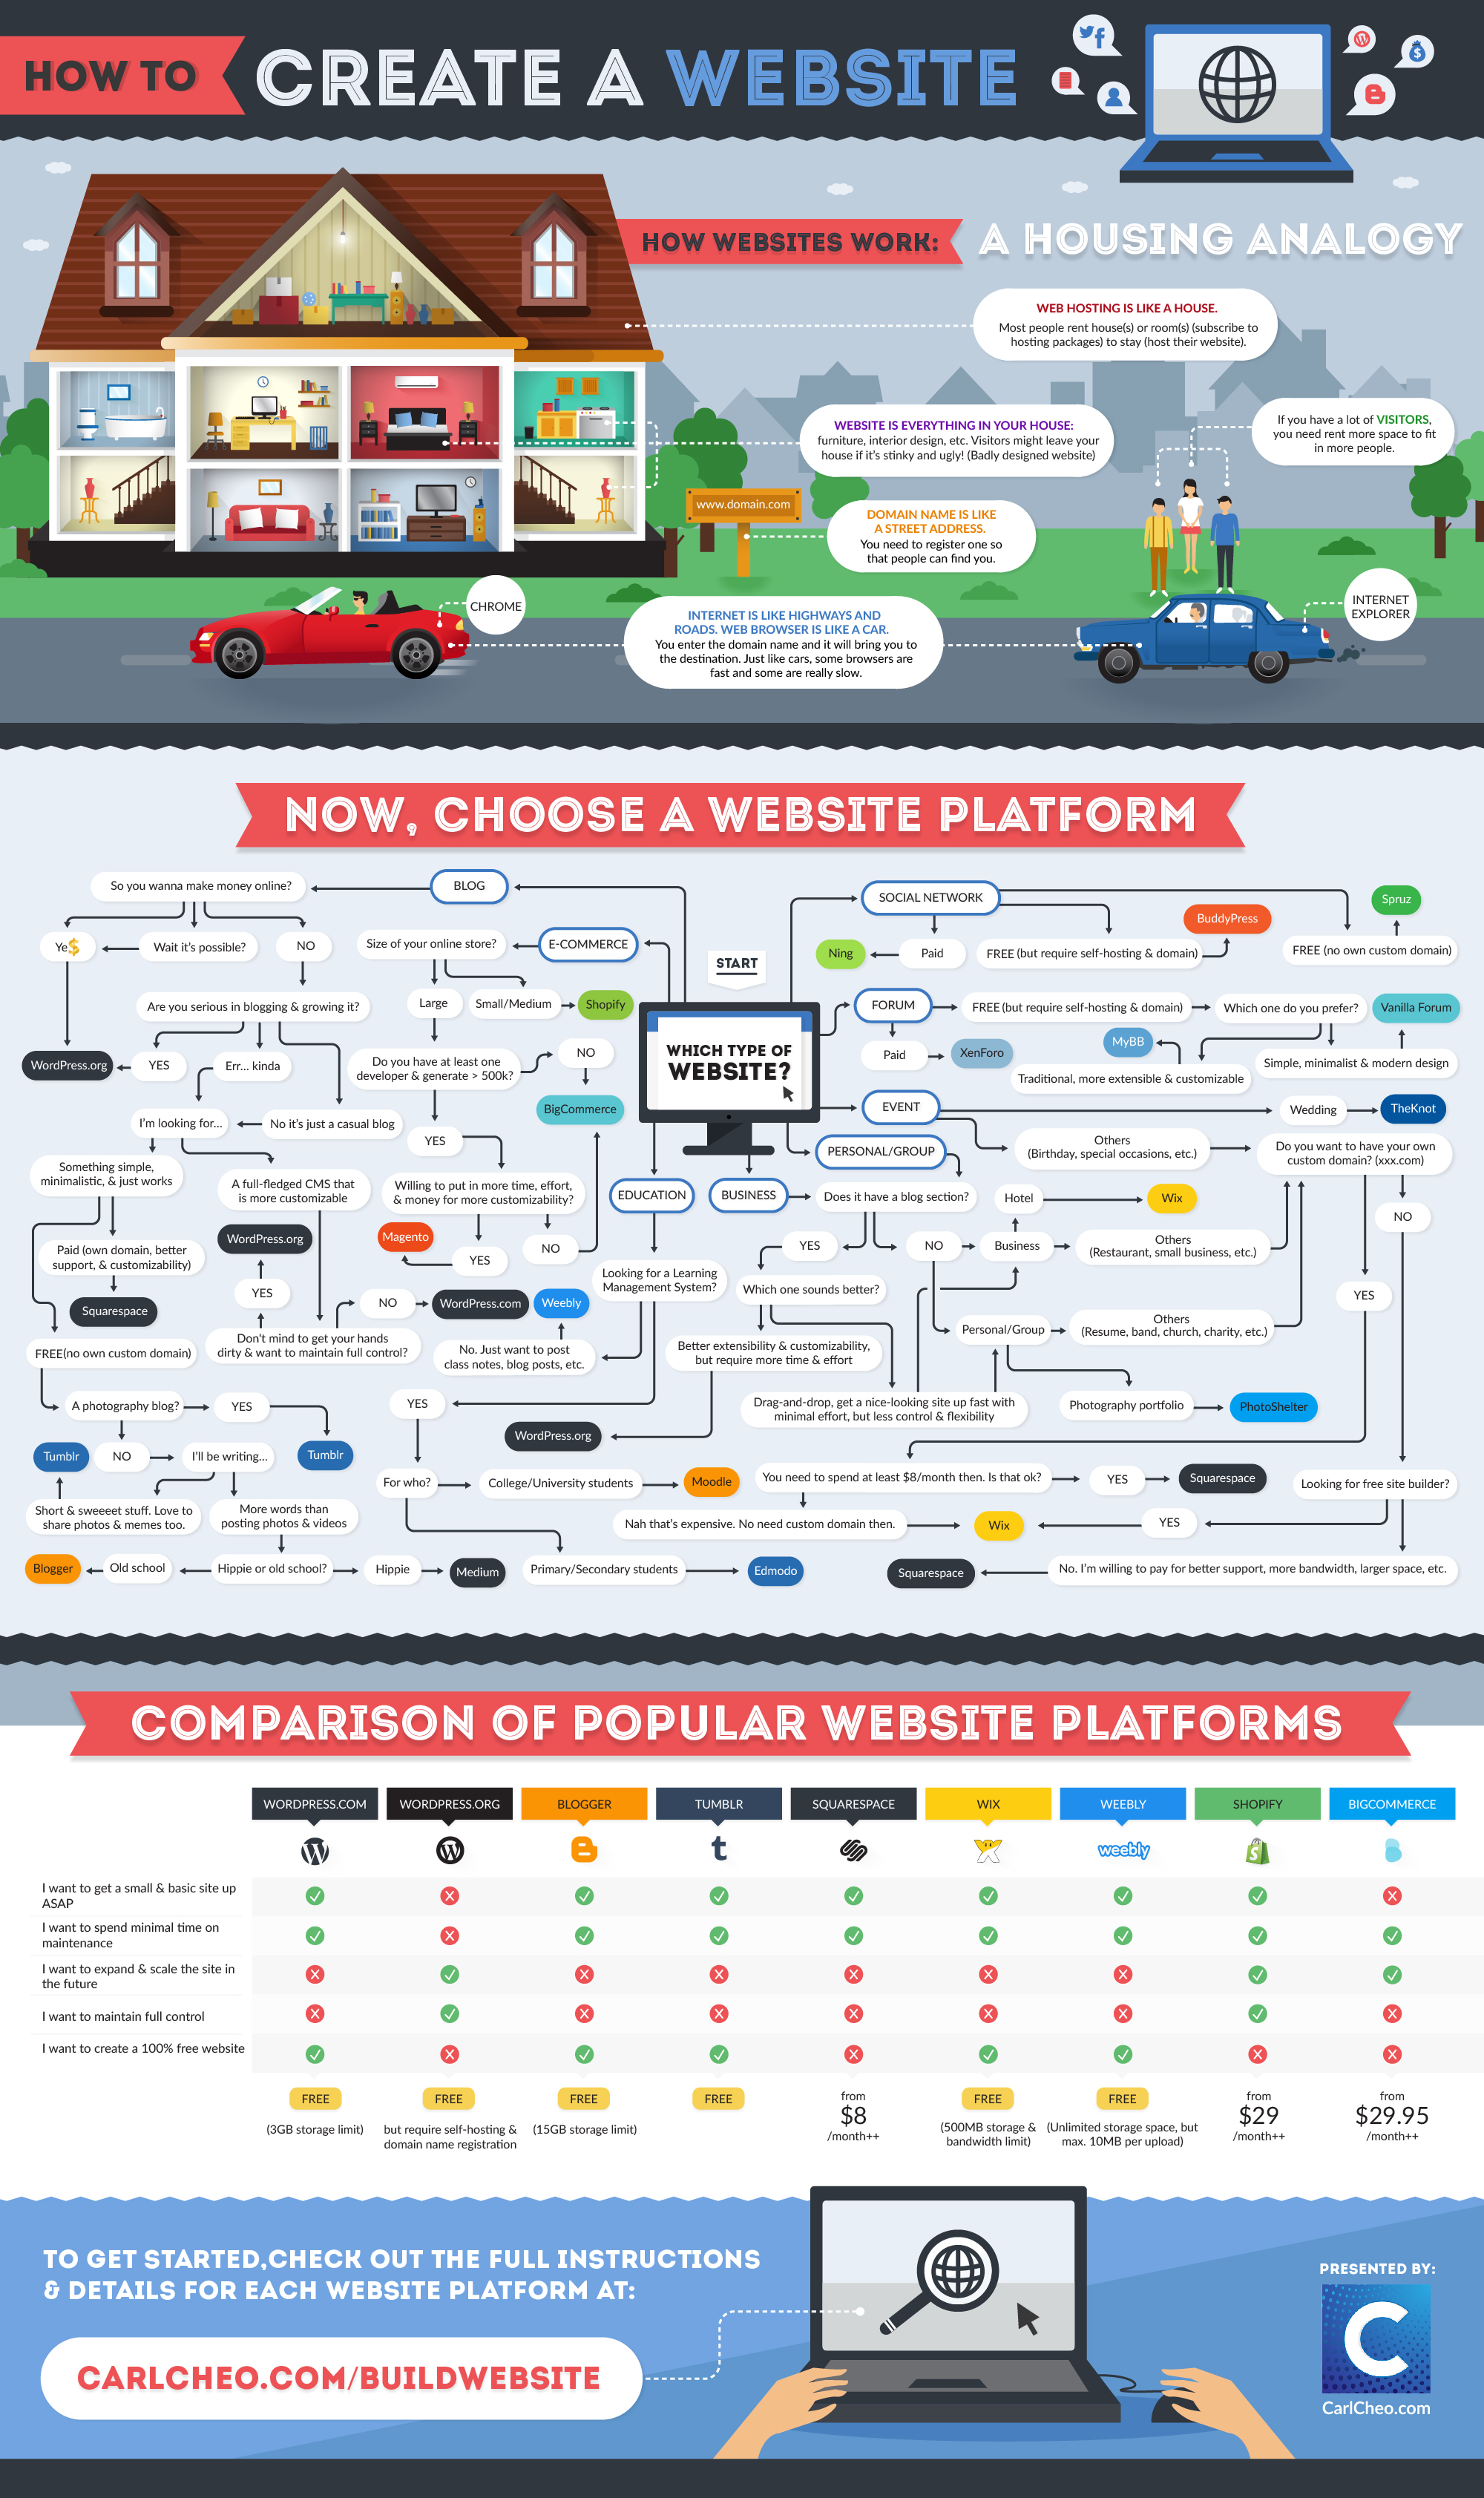 How To Create A Website: The Definitive Beginner’s Guide